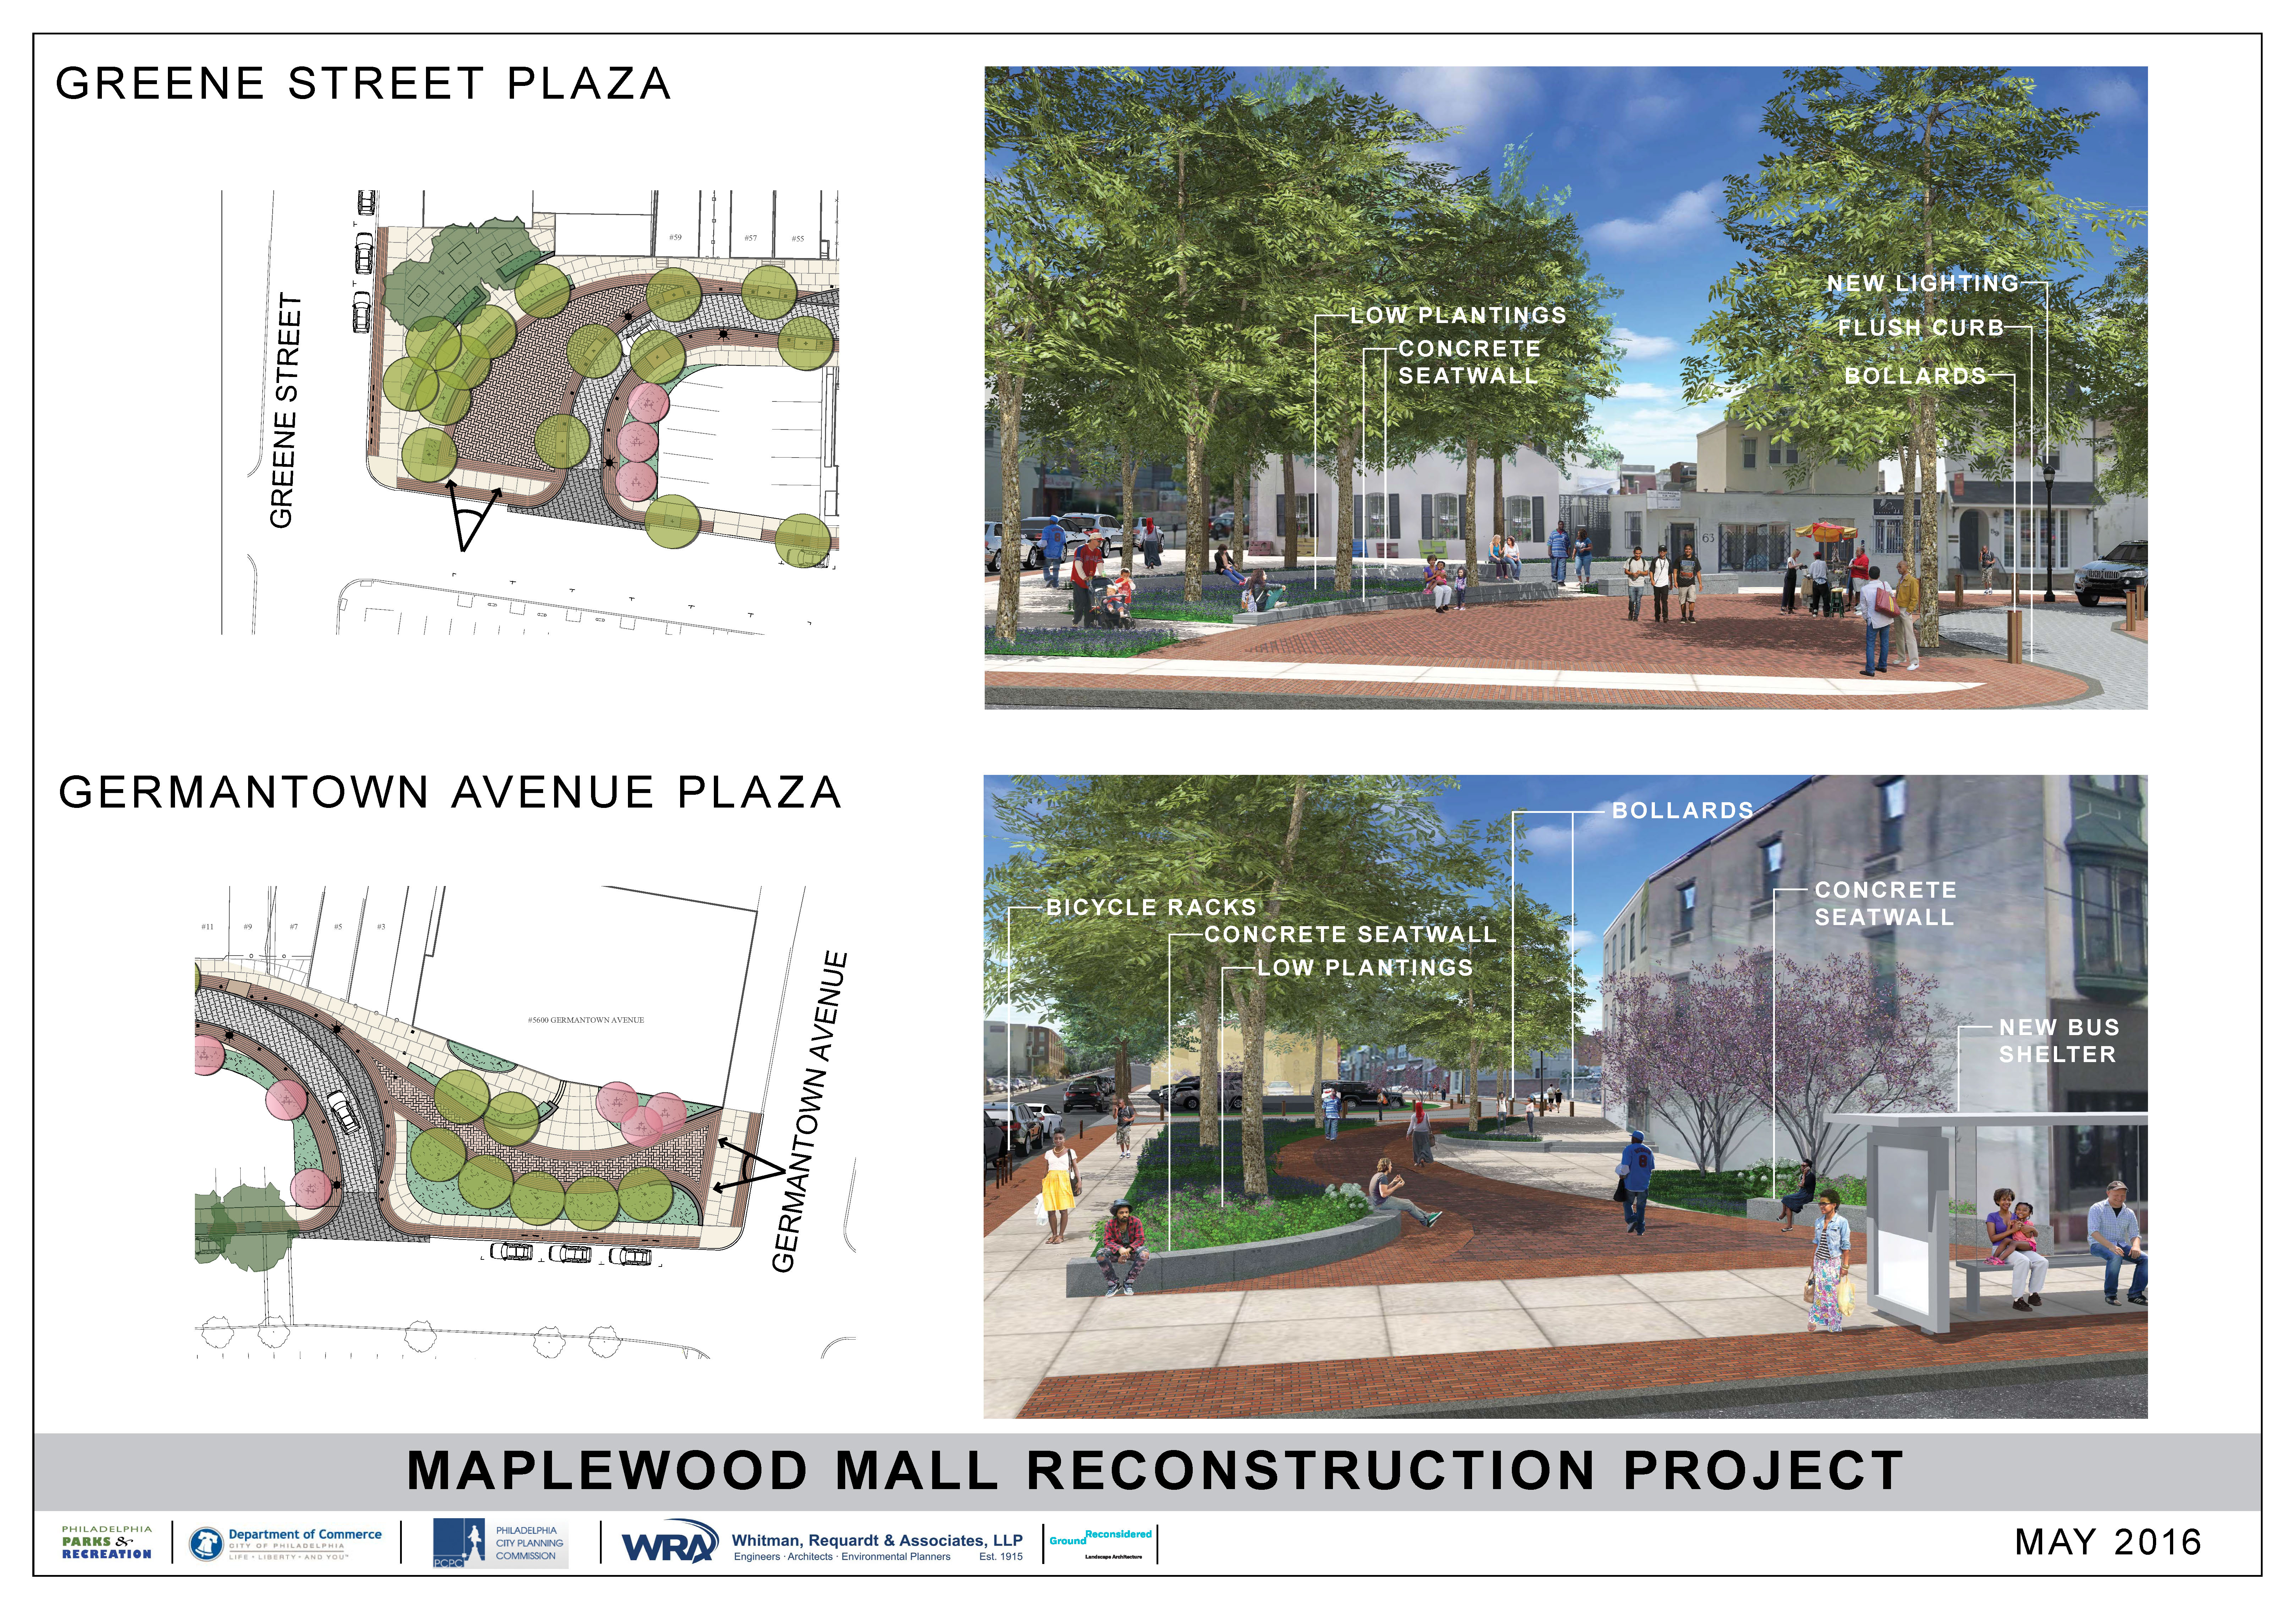 Maplewood Mall proposed reconstruction plan | WRA and Ground Reconsidered